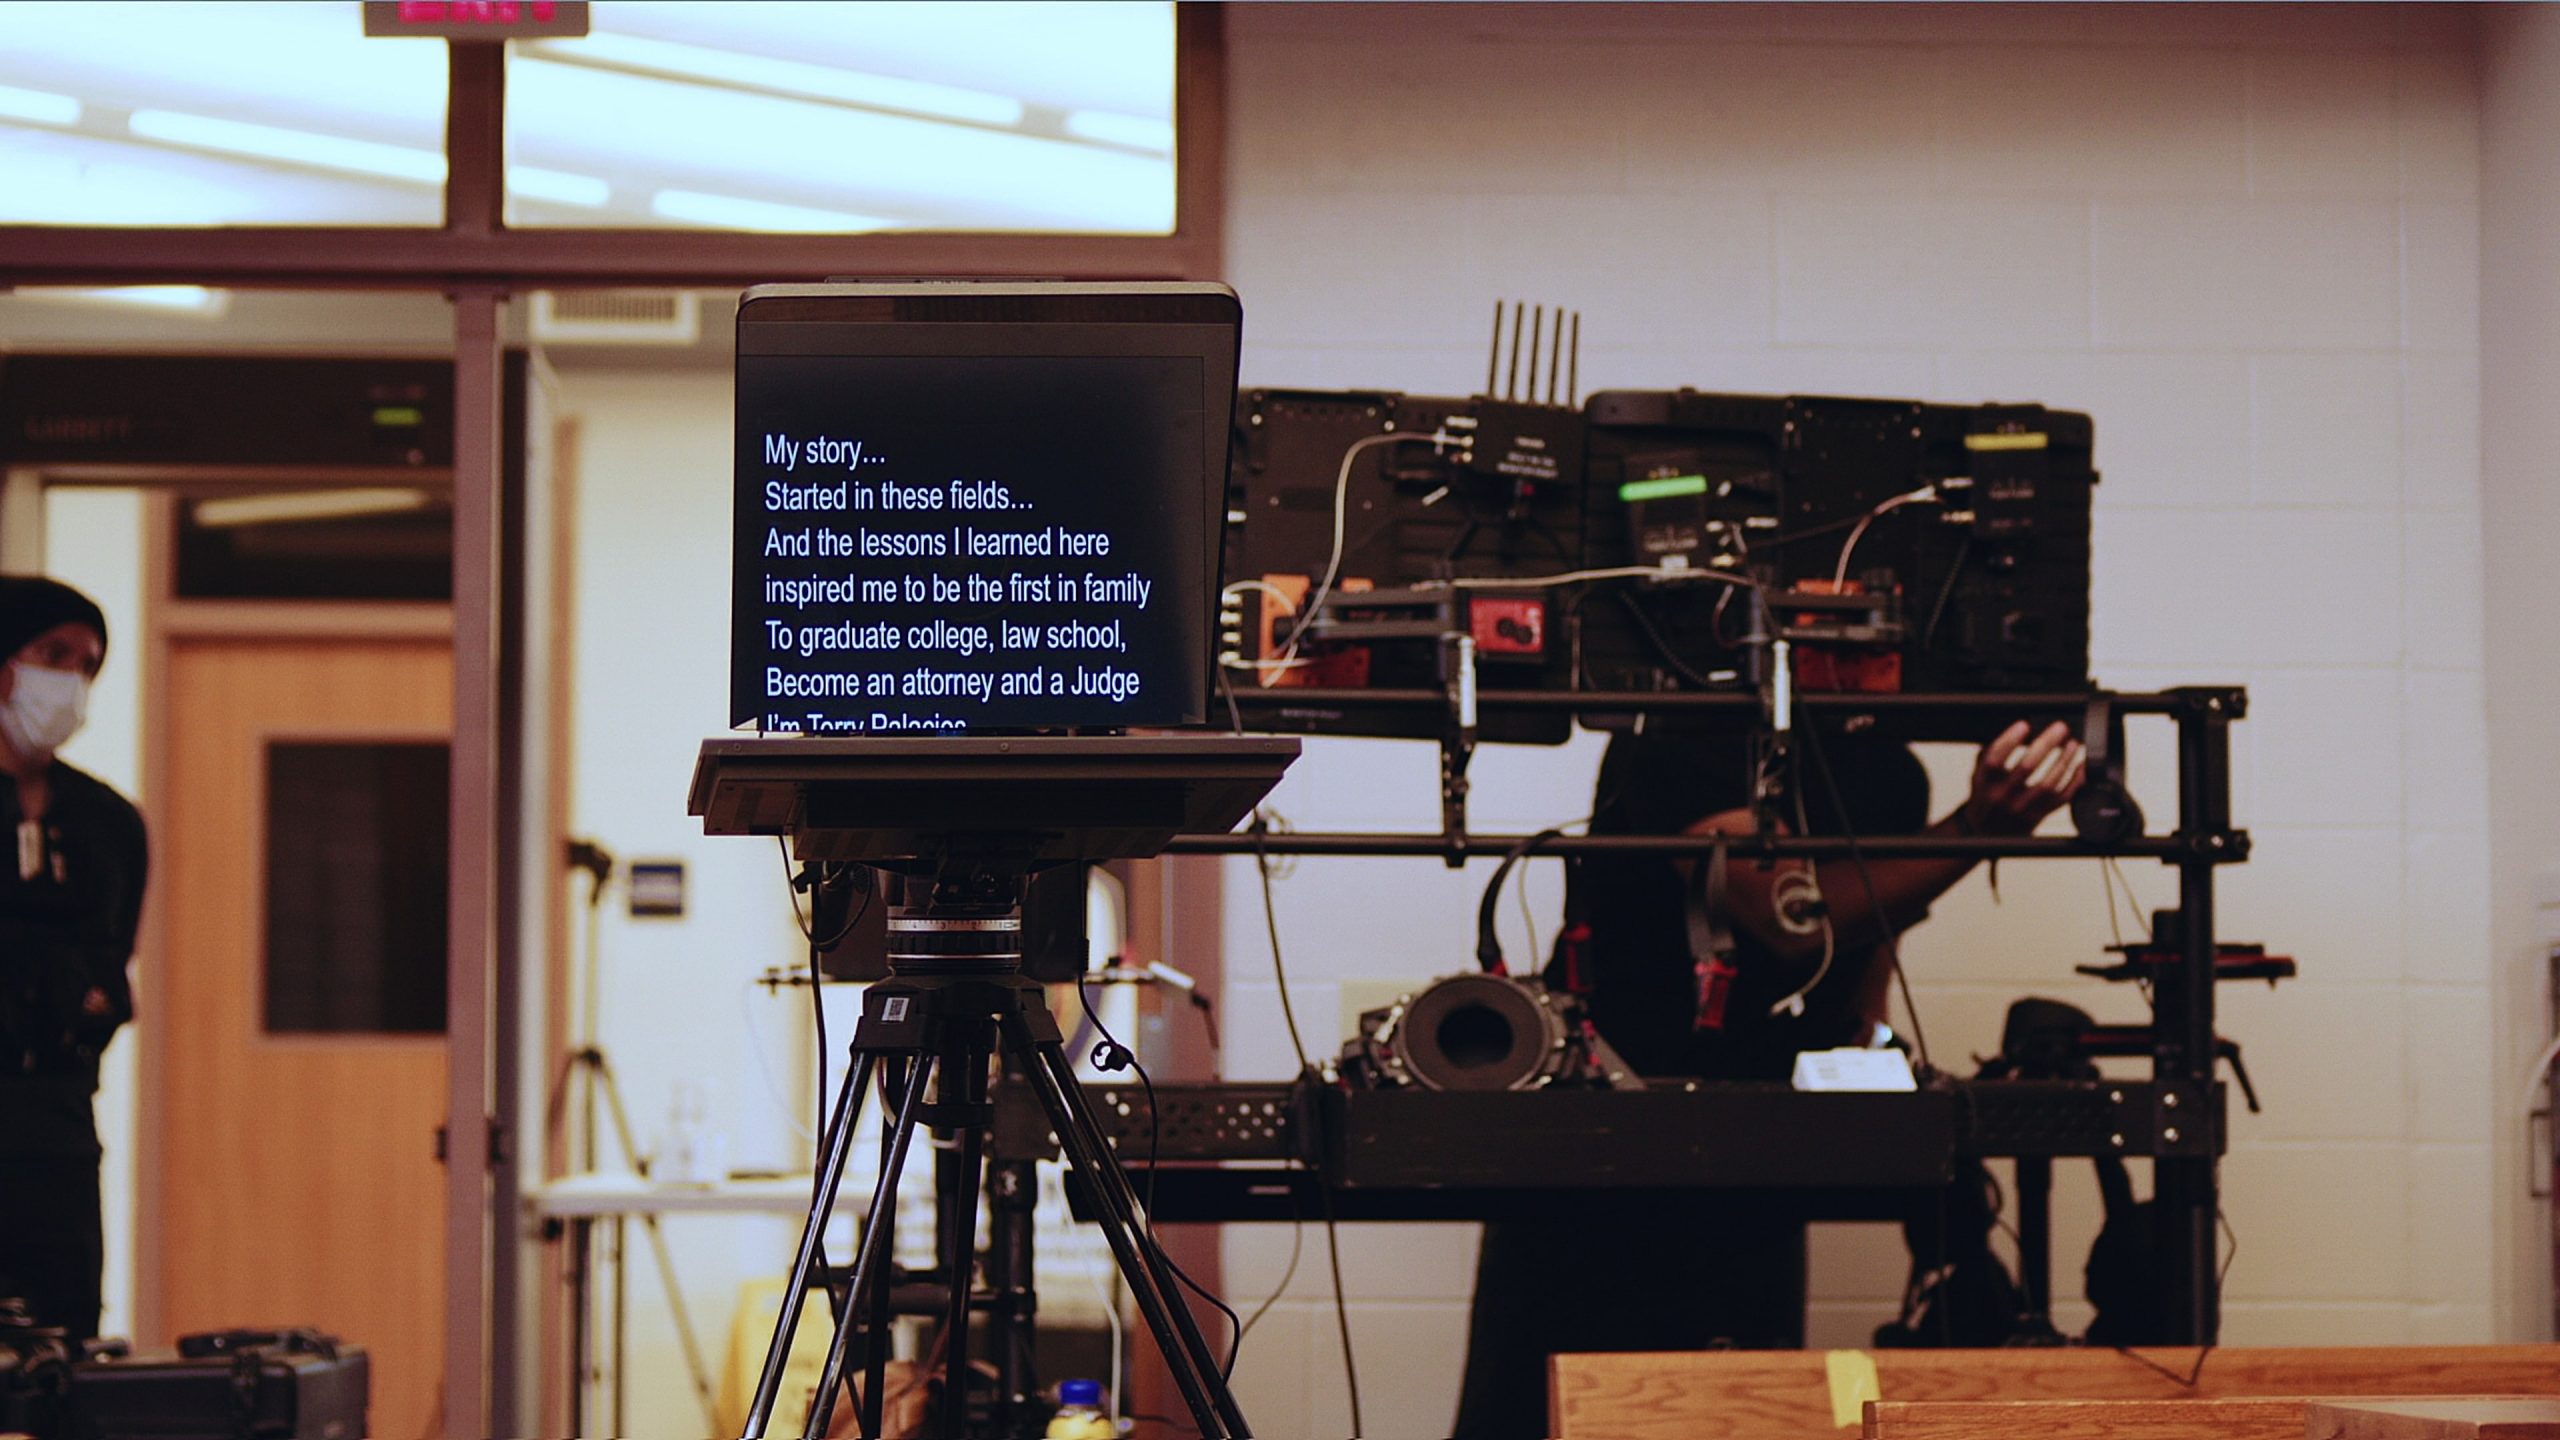 IU C&I Studios Page Gear Teleprompter on display with two crew members in the background